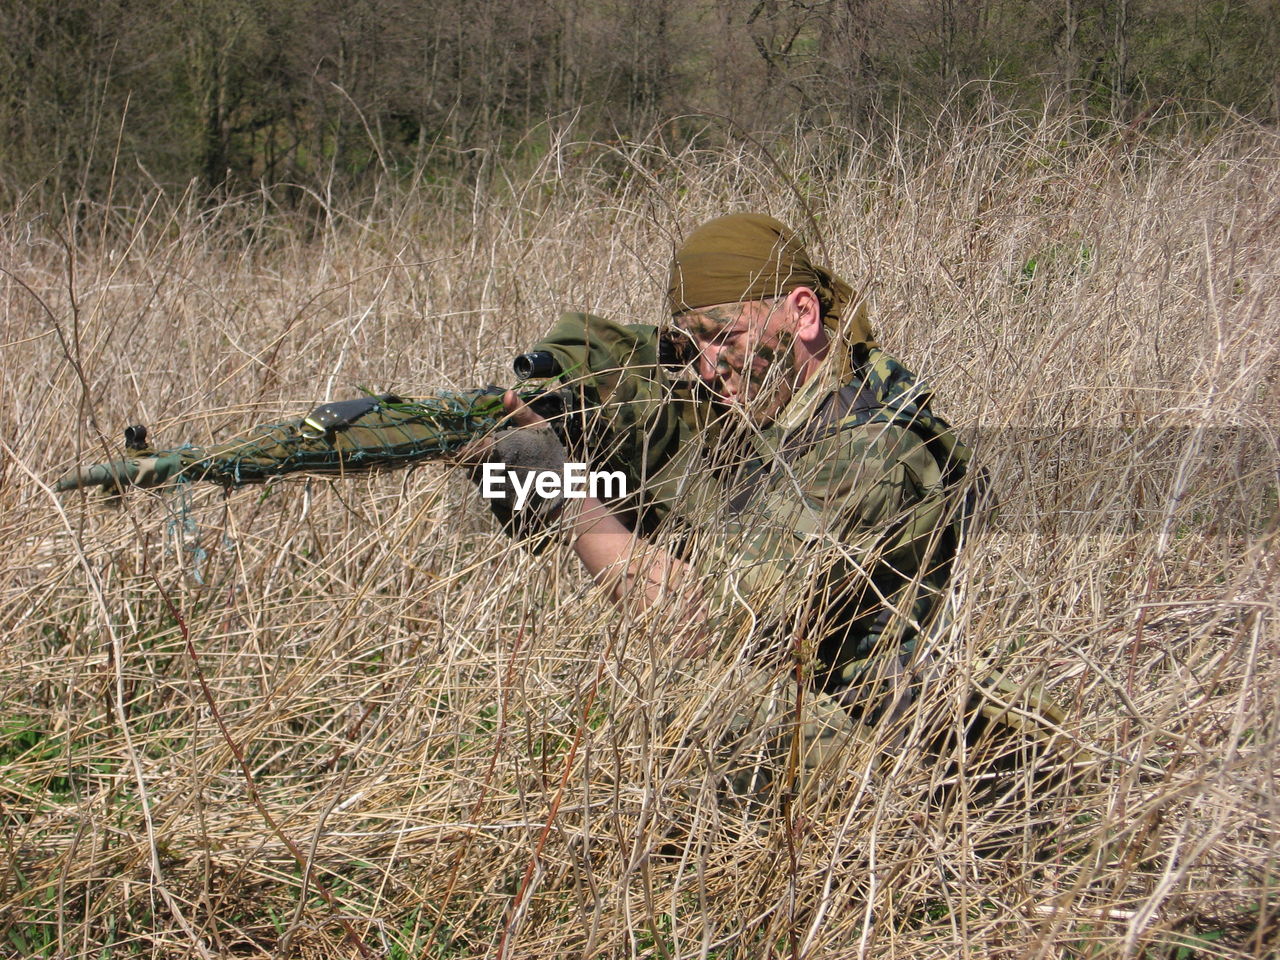 Sniped aiming with rifle at grassy field